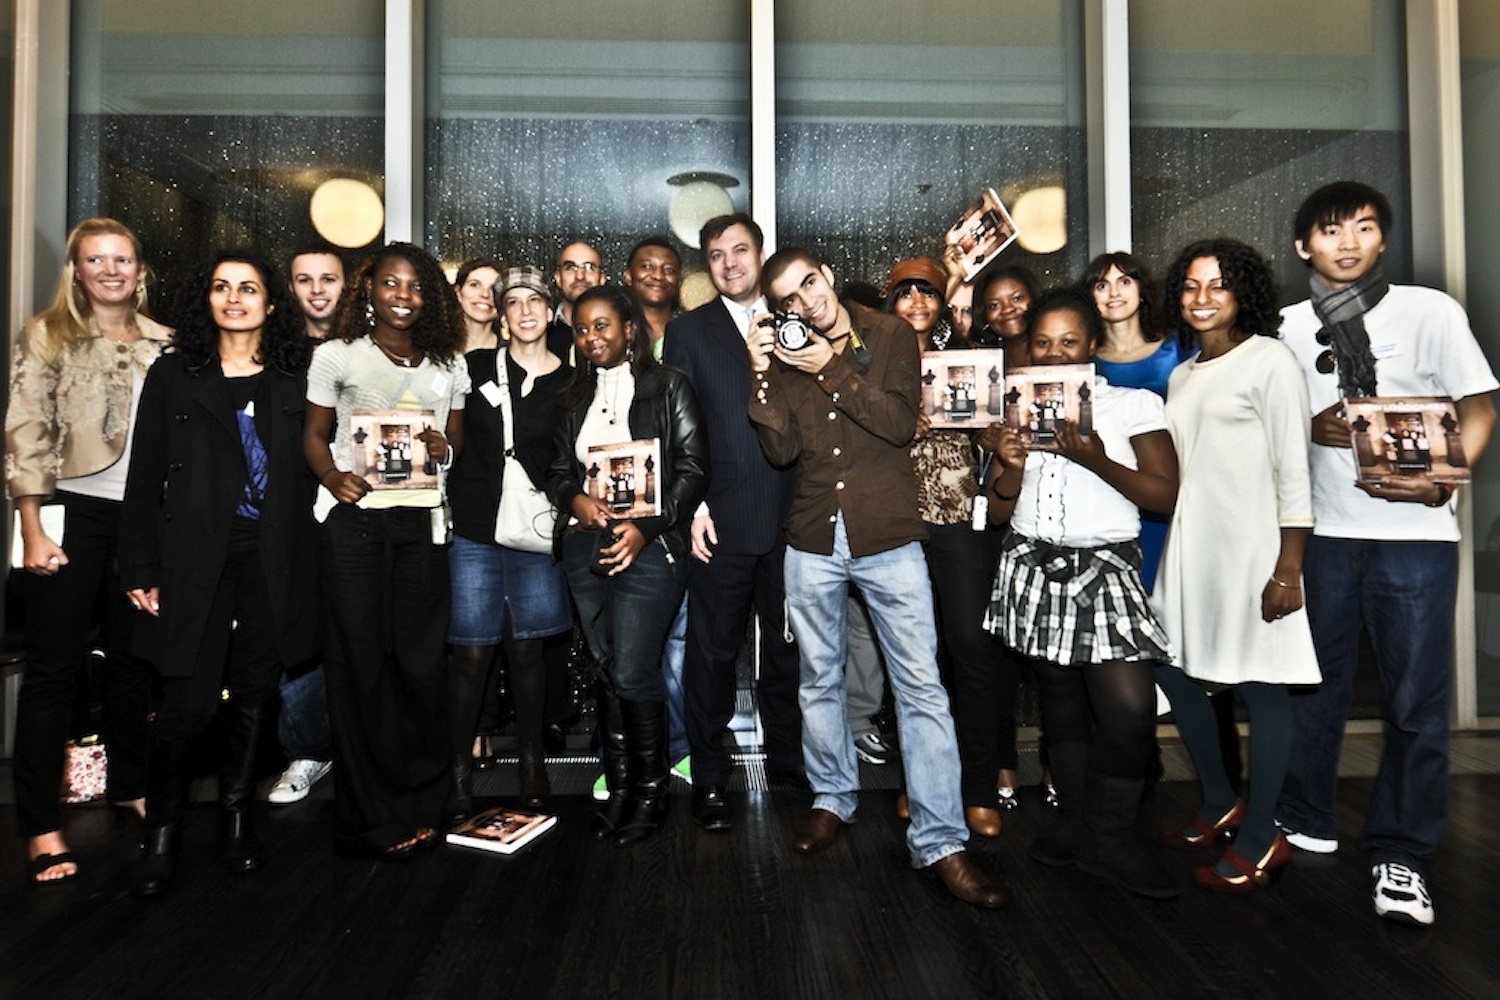  The photographers with Ed Balls, Secretary of the State for Children, Homes and Families at the New Londoners book launch at Tate Modern, October 2008 